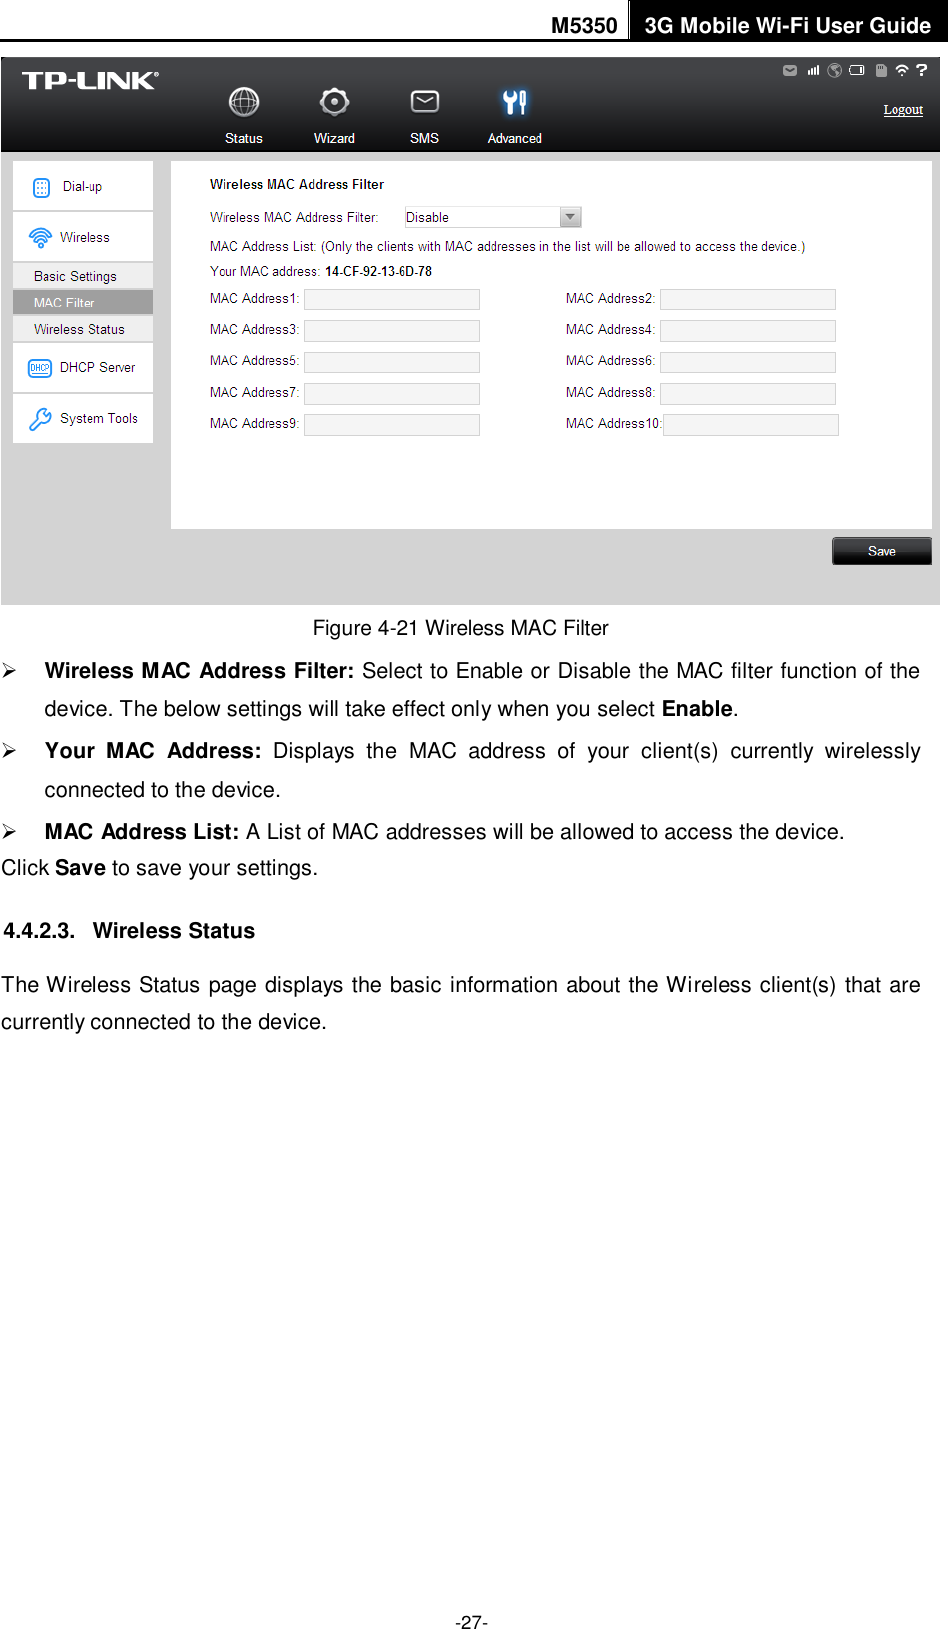 M5350 3G Mobile Wi-Fi User Guide  -27-  Figure 4-21 Wireless MAC Filter  Wireless MAC Address Filter: Select to Enable or Disable the MAC filter function of the device. The below settings will take effect only when you select Enable.  Your  MAC  Address:  Displays  the  MAC  address  of  your  client(s)  currently  wirelessly connected to the device.  MAC Address List: A List of MAC addresses will be allowed to access the device. Click Save to save your settings. 4.4.2.3.  Wireless Status The Wireless Status page displays the basic information about the Wireless client(s) that are currently connected to the device.  